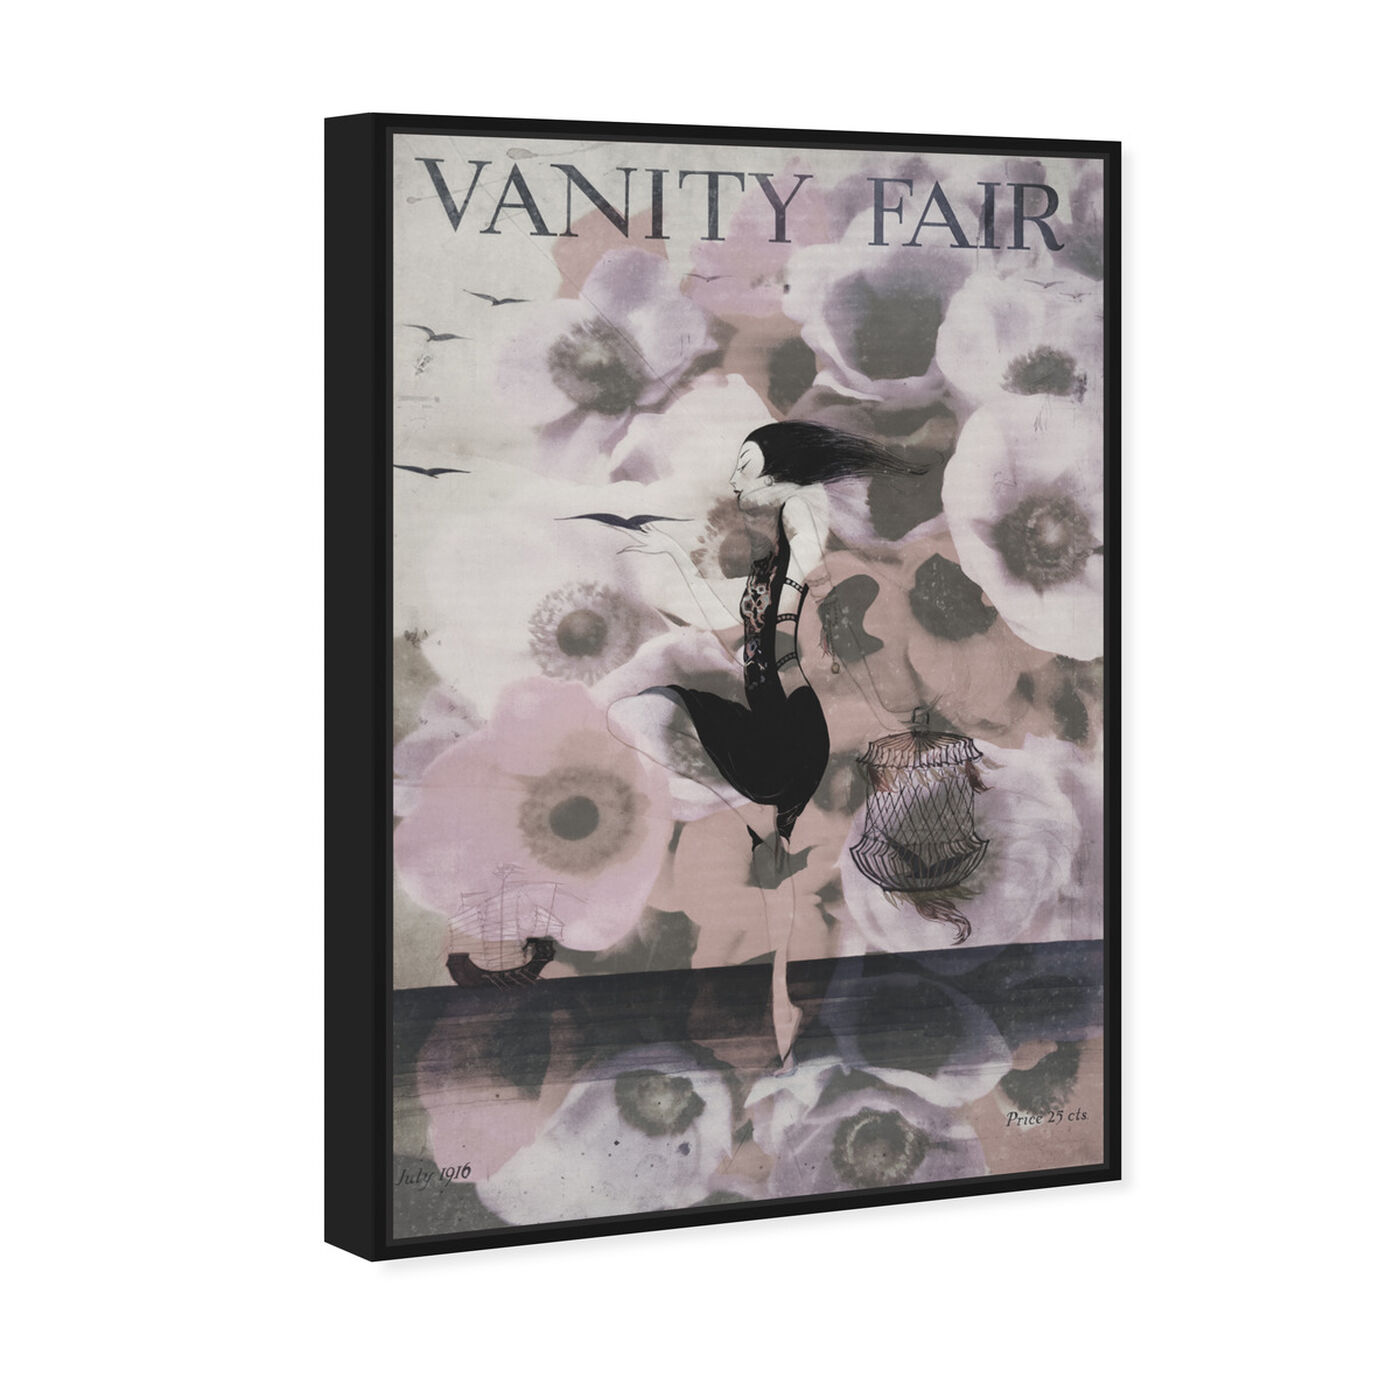 Angled view of Vanity Fair featuring advertising and publications art.